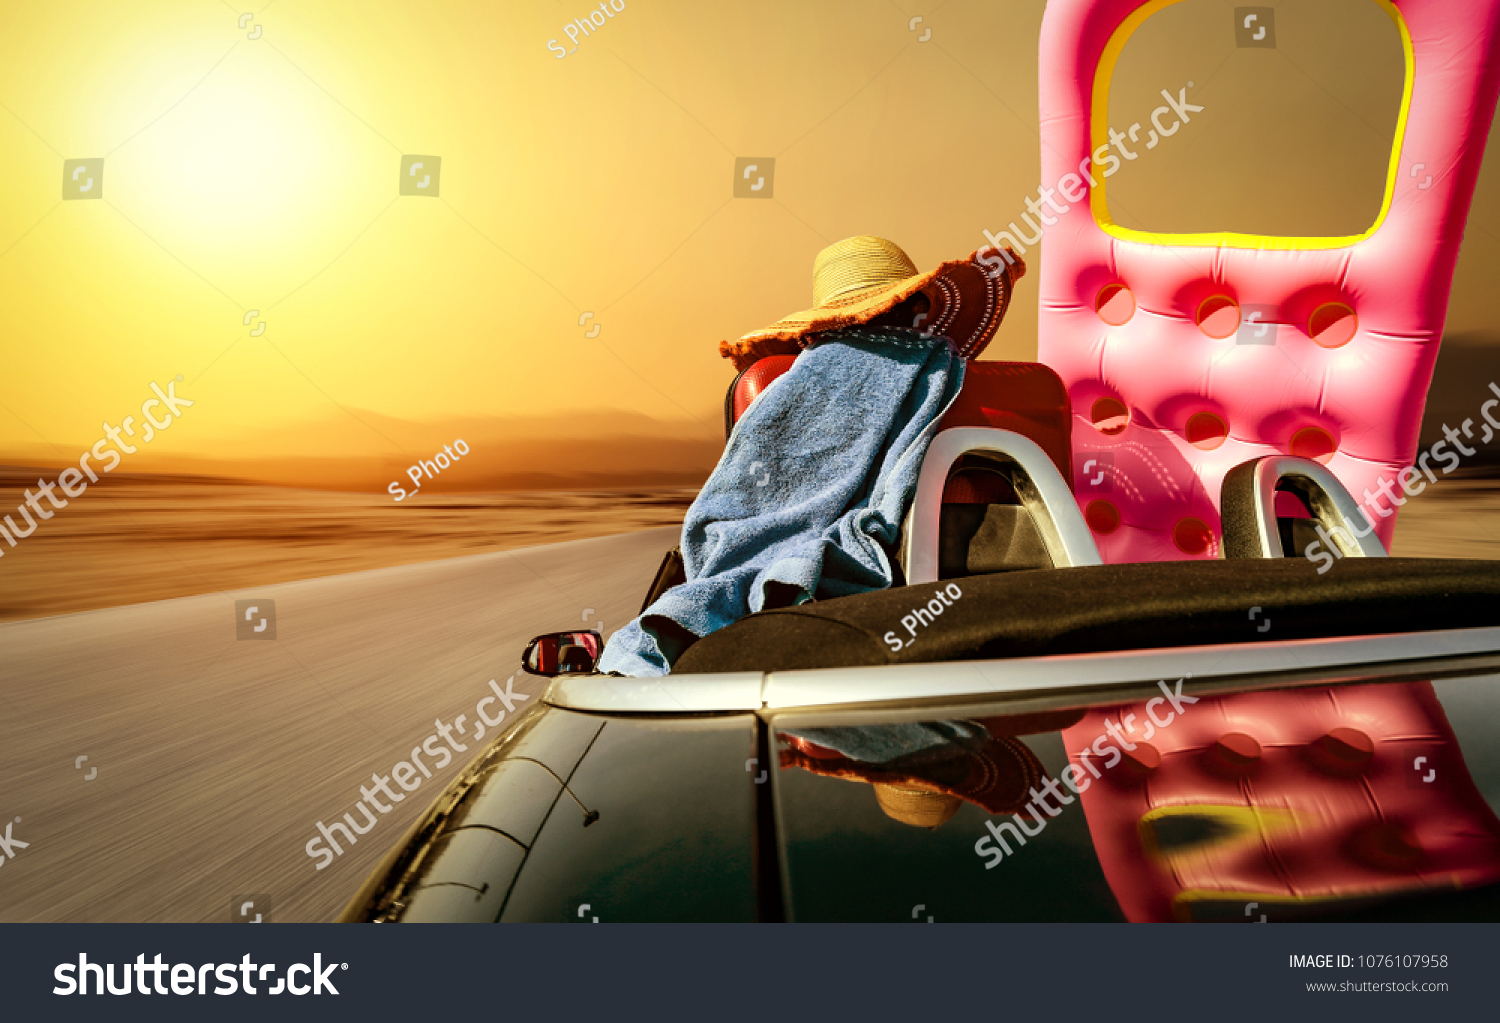 Summer car and road with sunset of golden colors. Free space for your text.  #1076107958